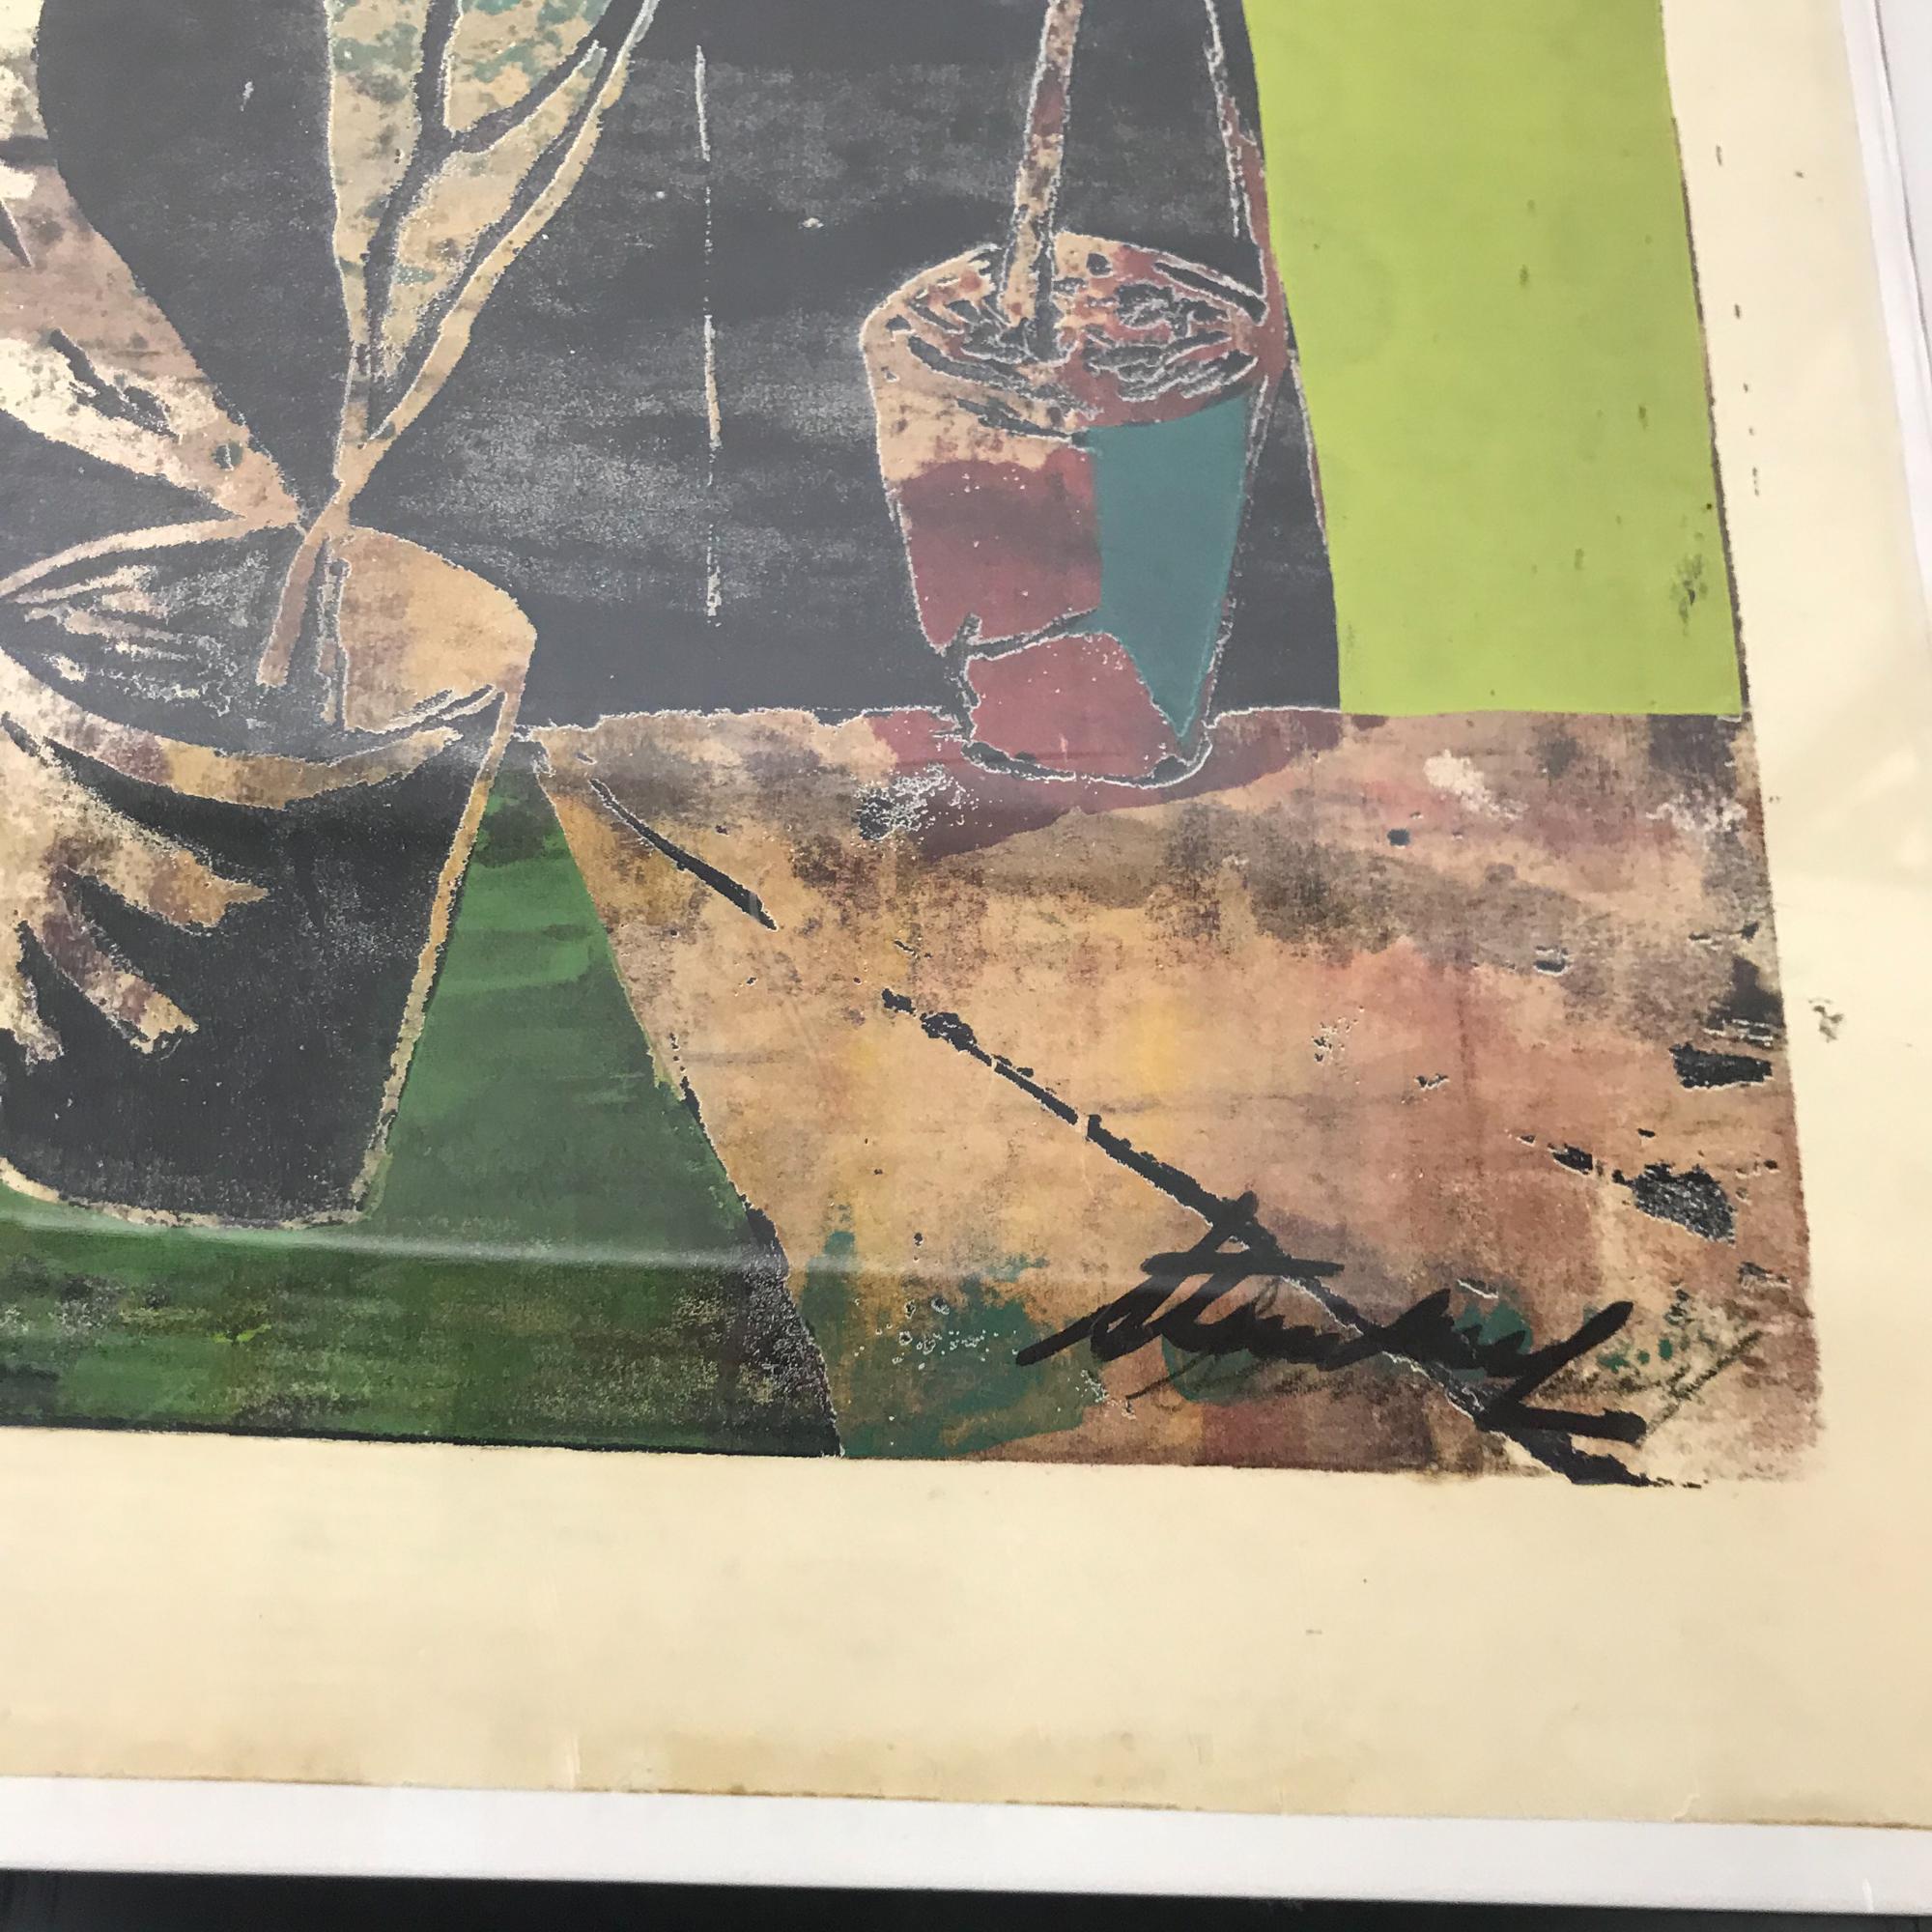 For your consideration a wall art in a rectangular shape. The art has an abstract cubism technique. It appears to be a wood block or lithograph. 
Dominant color is green and black tones. 
The still life shows a woman with three small pots and